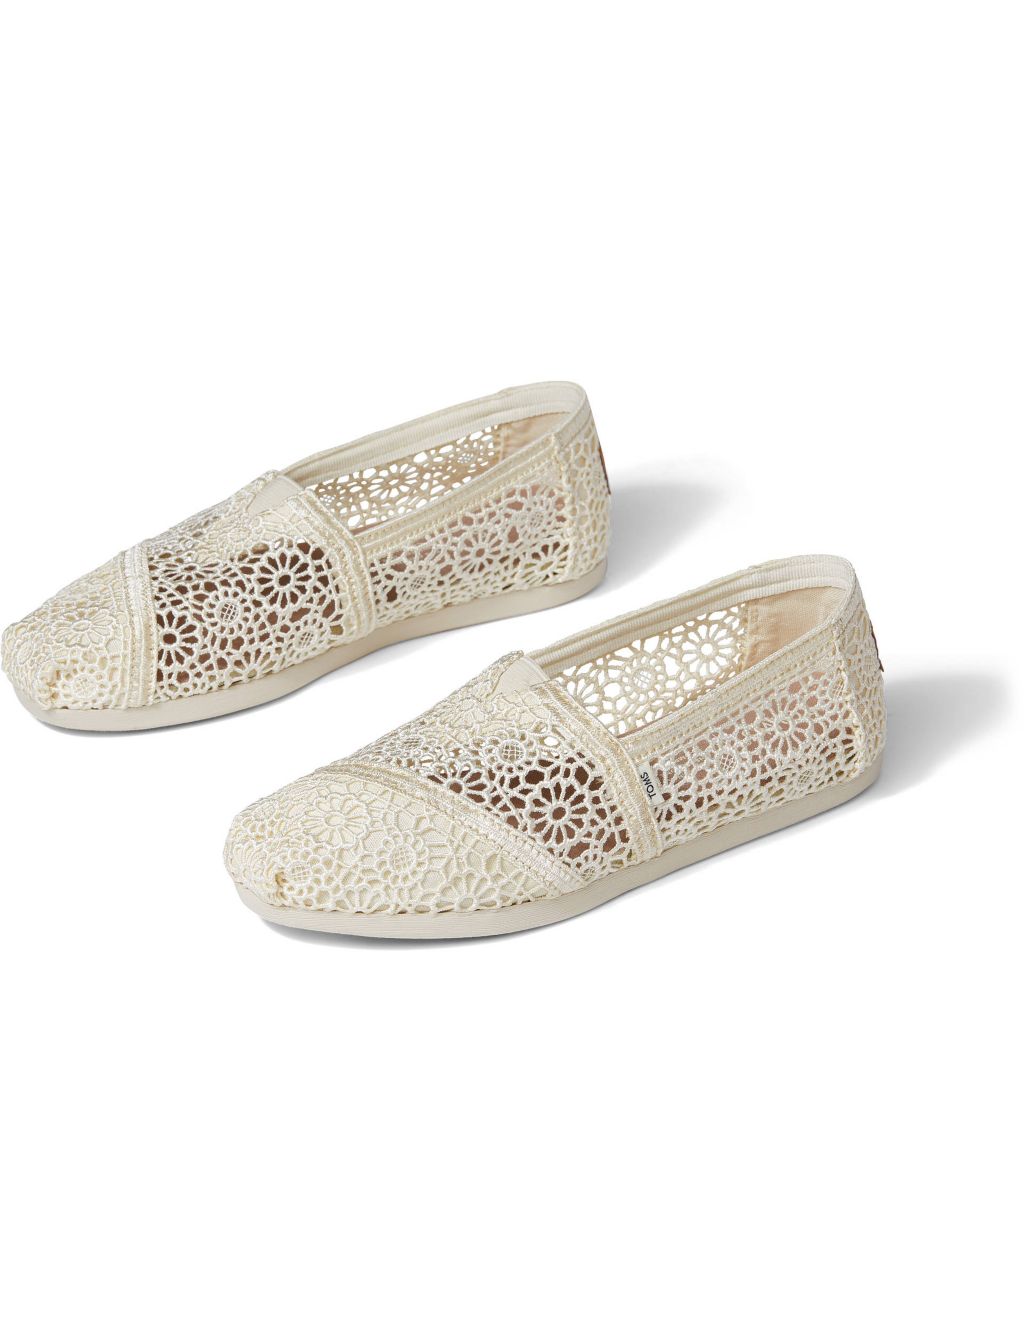 Canvas Embroidered Espadrilles image 2